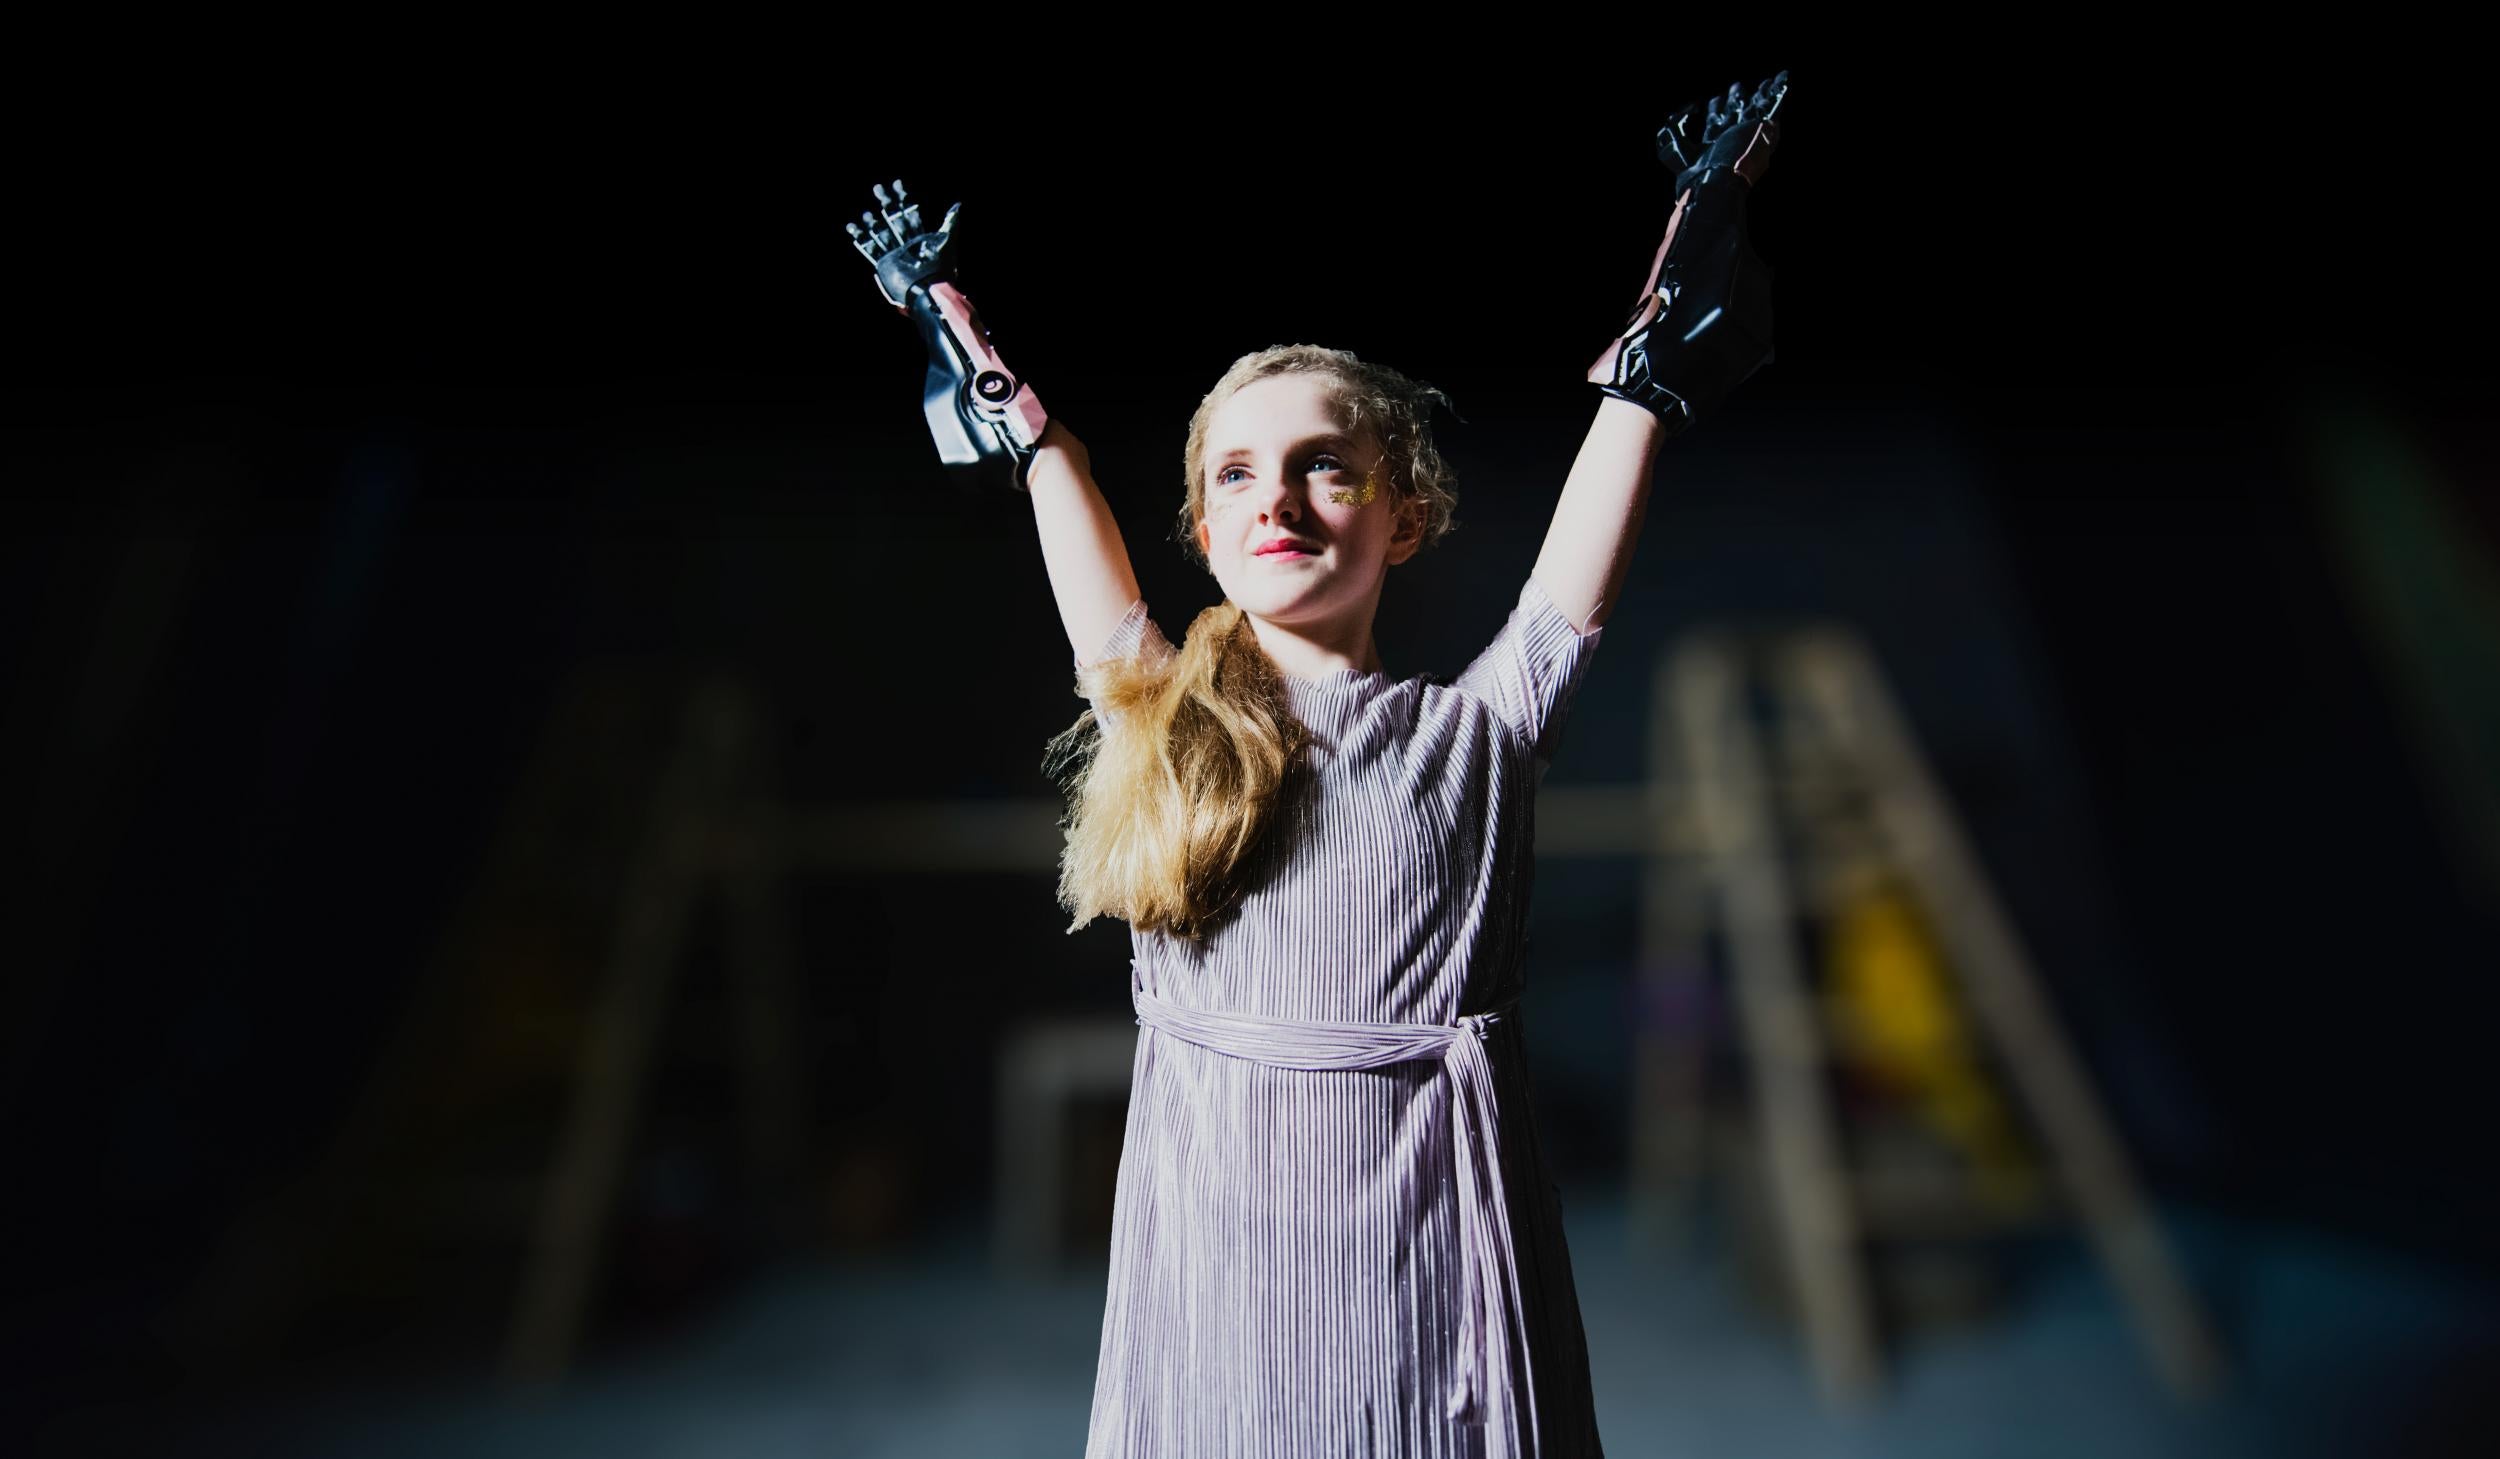 Open Bionics uses 3D printing technology to produce custom bionic arms for children as young as 9 years old